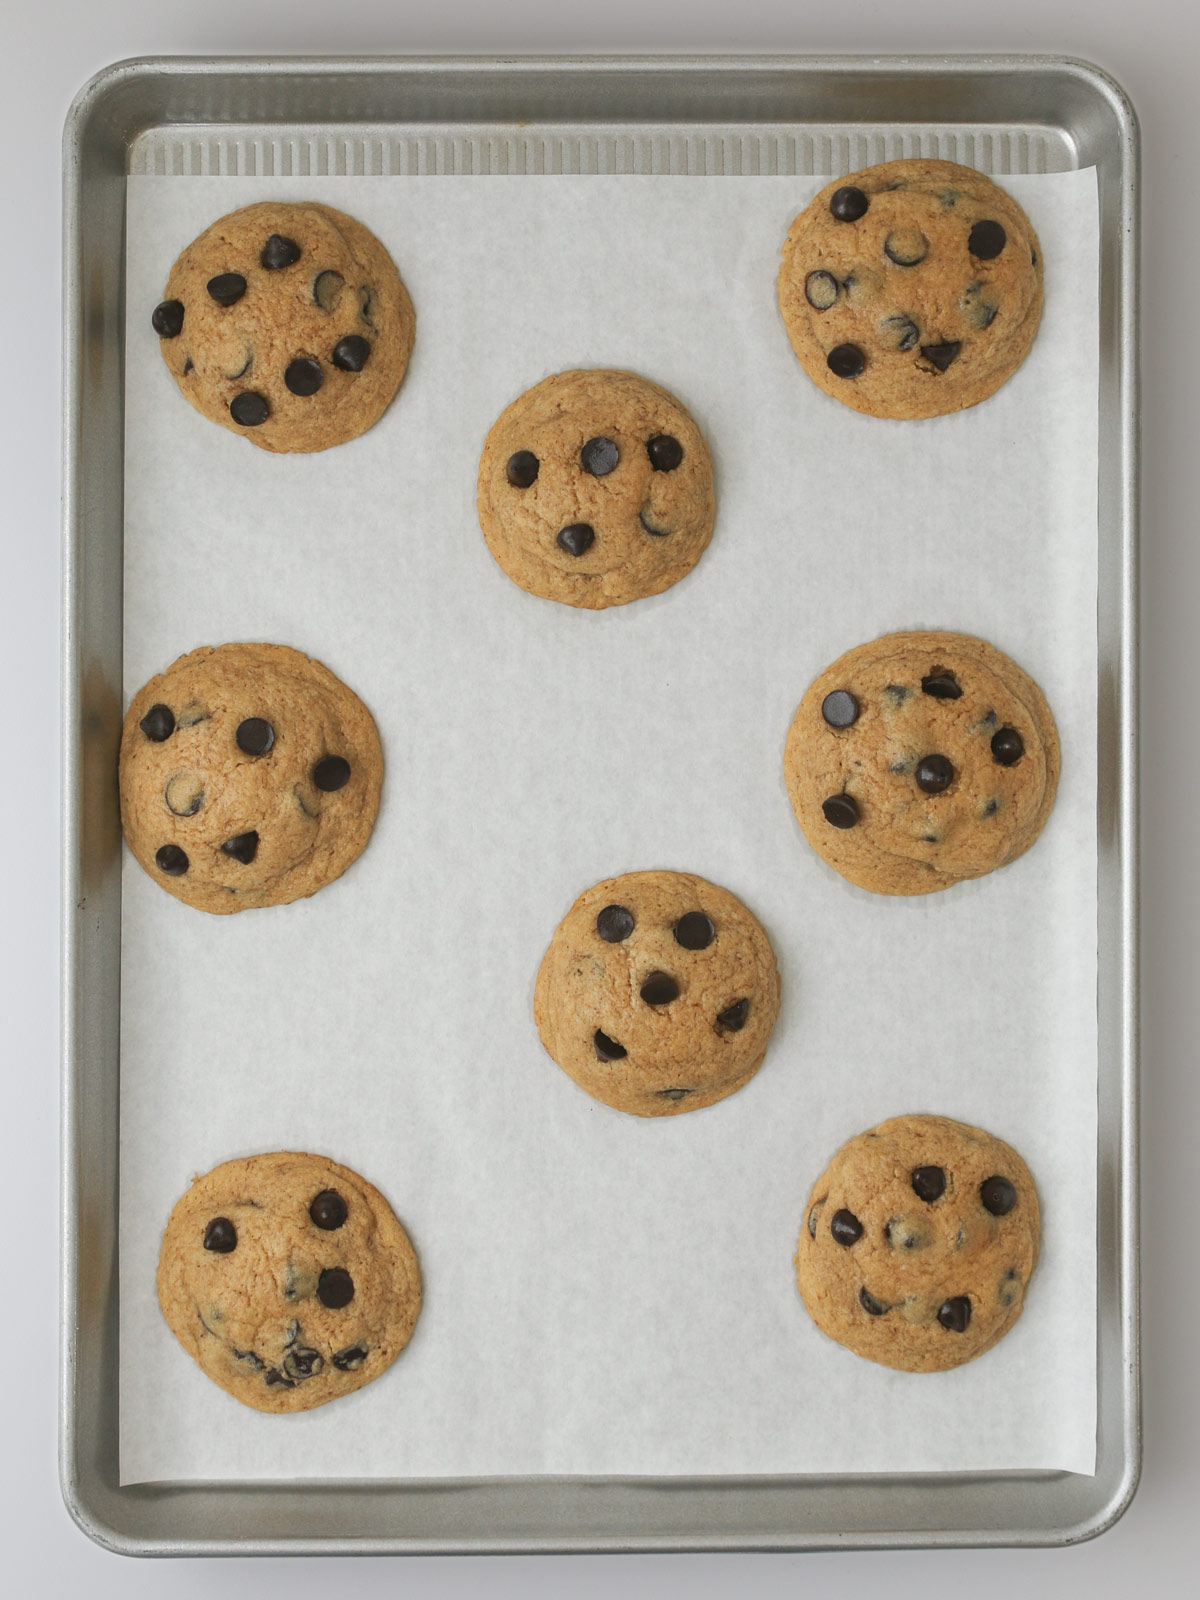 baked cookies on lined sheet.